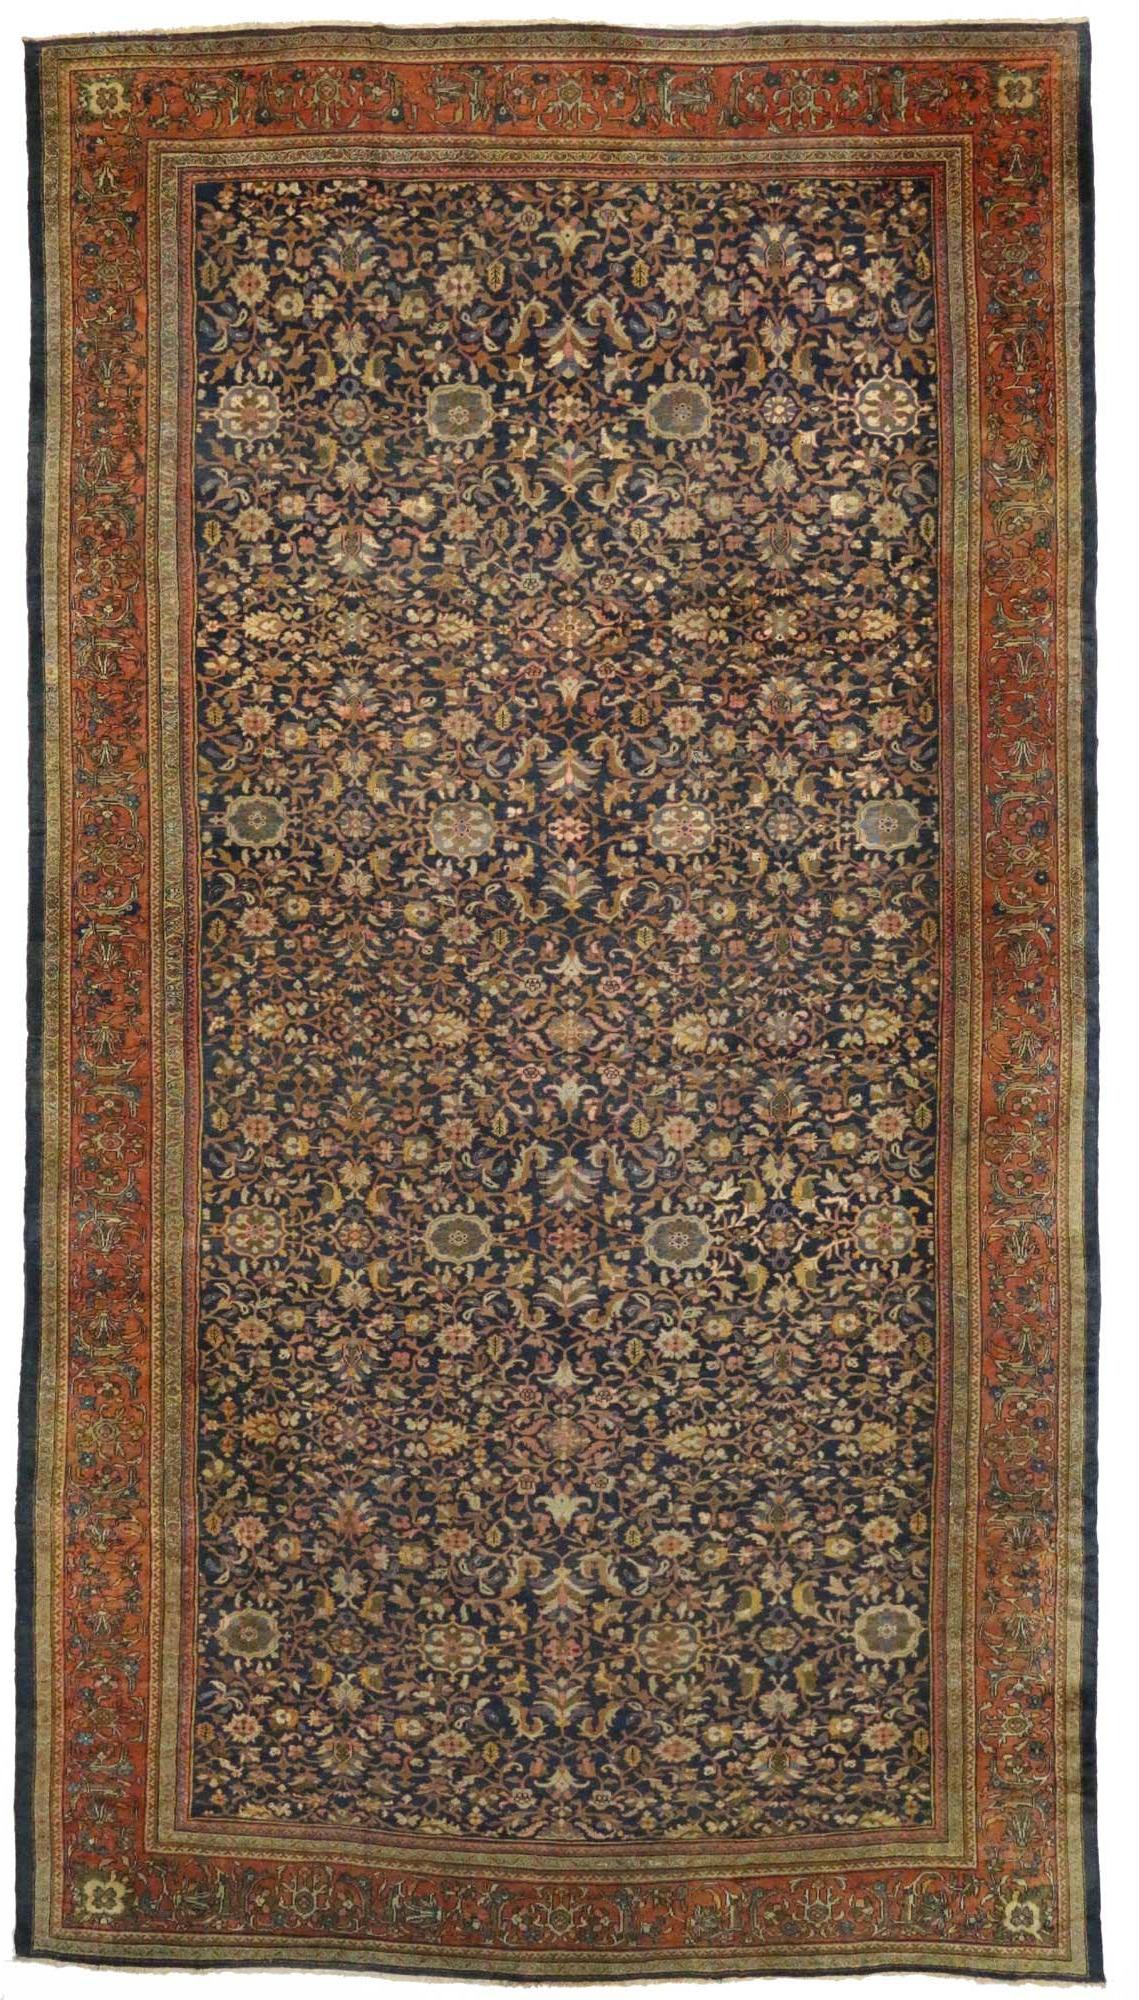 72909 Antique Persian Sultanabad Palace Rug with Modern Rustic Italian Cottage Style 13'00 x 23'00. With its timeless design and understated elegance​, this hand-knotted wool antique Persian Sultanabad palace rug charms with ease and beautifully